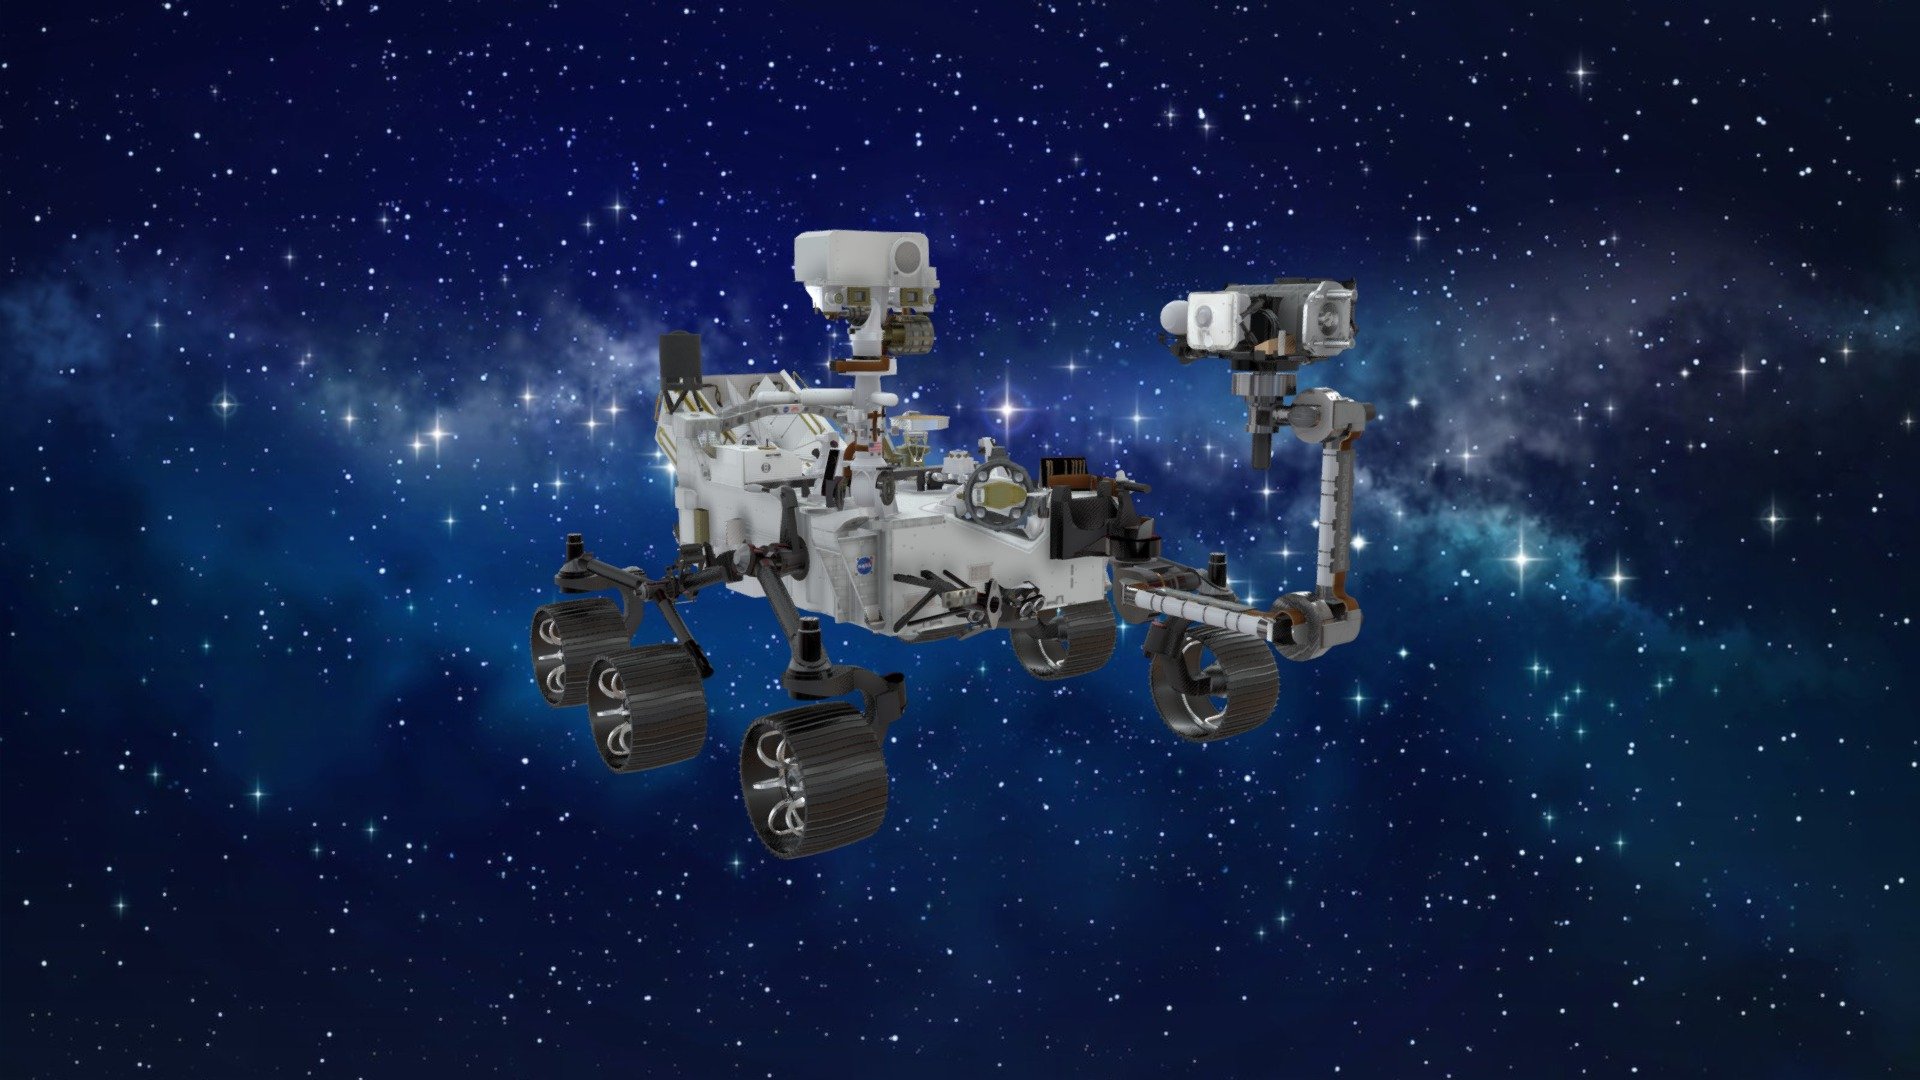 The NASA Mars Exploration Program features the Perseverance rover, launched aboard an Atlas V launch vehicle to the Jezero crater on Mars. Perseverance's mission is multifaceted, involving the study of astrobiologically significant ancient Martian environments and the investigation of surface geological processes and history. This includes assessing past habitability, exploring the possibility of past life on Mars, and examining the potential for preserving biosignatures within accessible geological materials.

A remarkable aspect of Perseverance's mission is its plan to cache sample containers along its route, creating the possibility for future retrieval by a Mars sample-return mission. The rover is equipped with an impressive array of tools, including nineteen cameras and two microphones, enabling it to capture detailed images and audio recordings of the Martian environment, enriching our understanding of the Red Planet 3d model